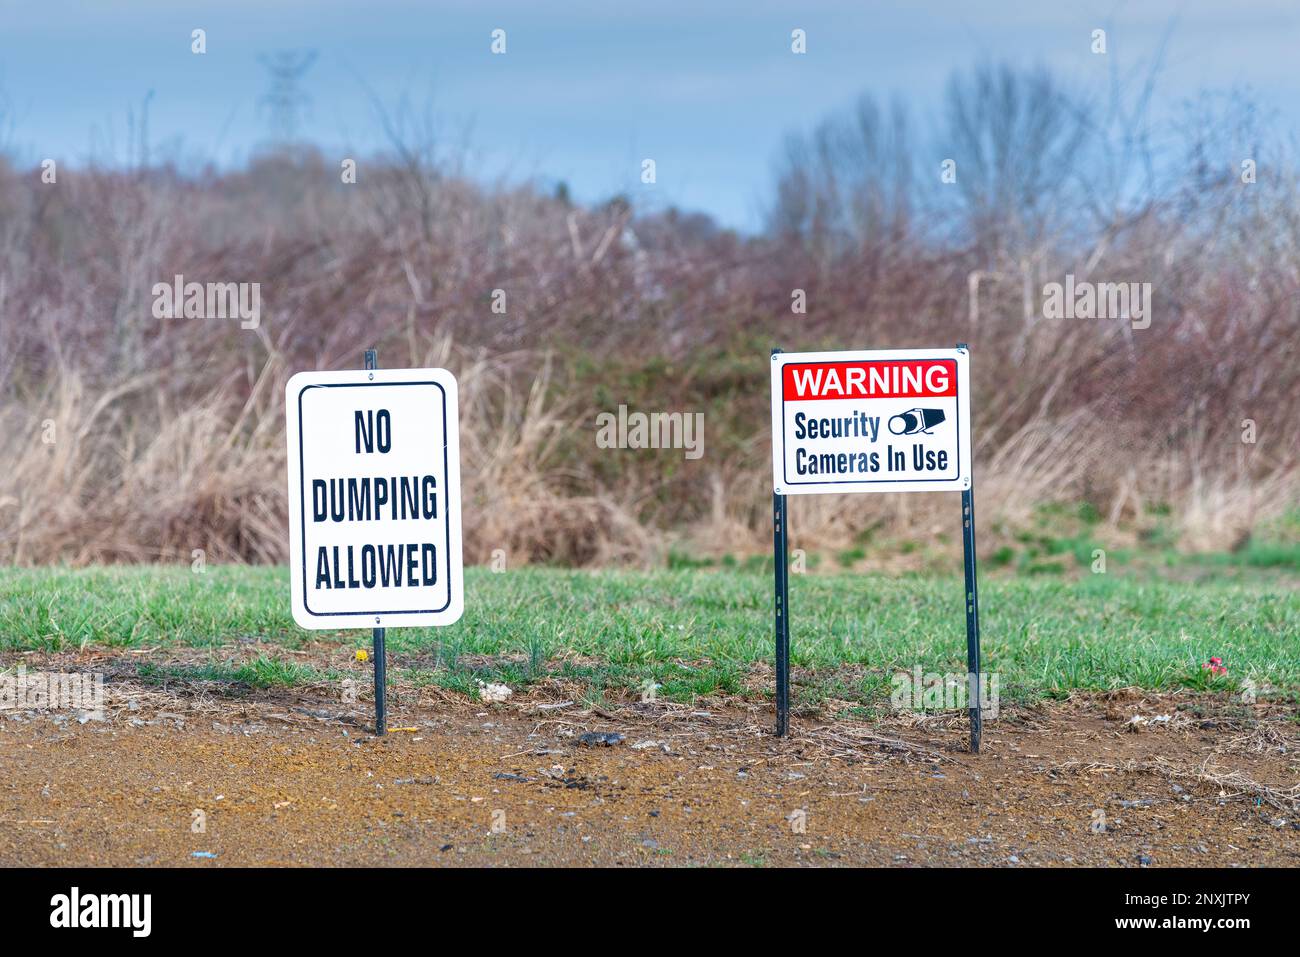 Horizontal shot of a No Dumping Allowed sign and a Warning Security Cameras In Use sign in a field. Stock Photo